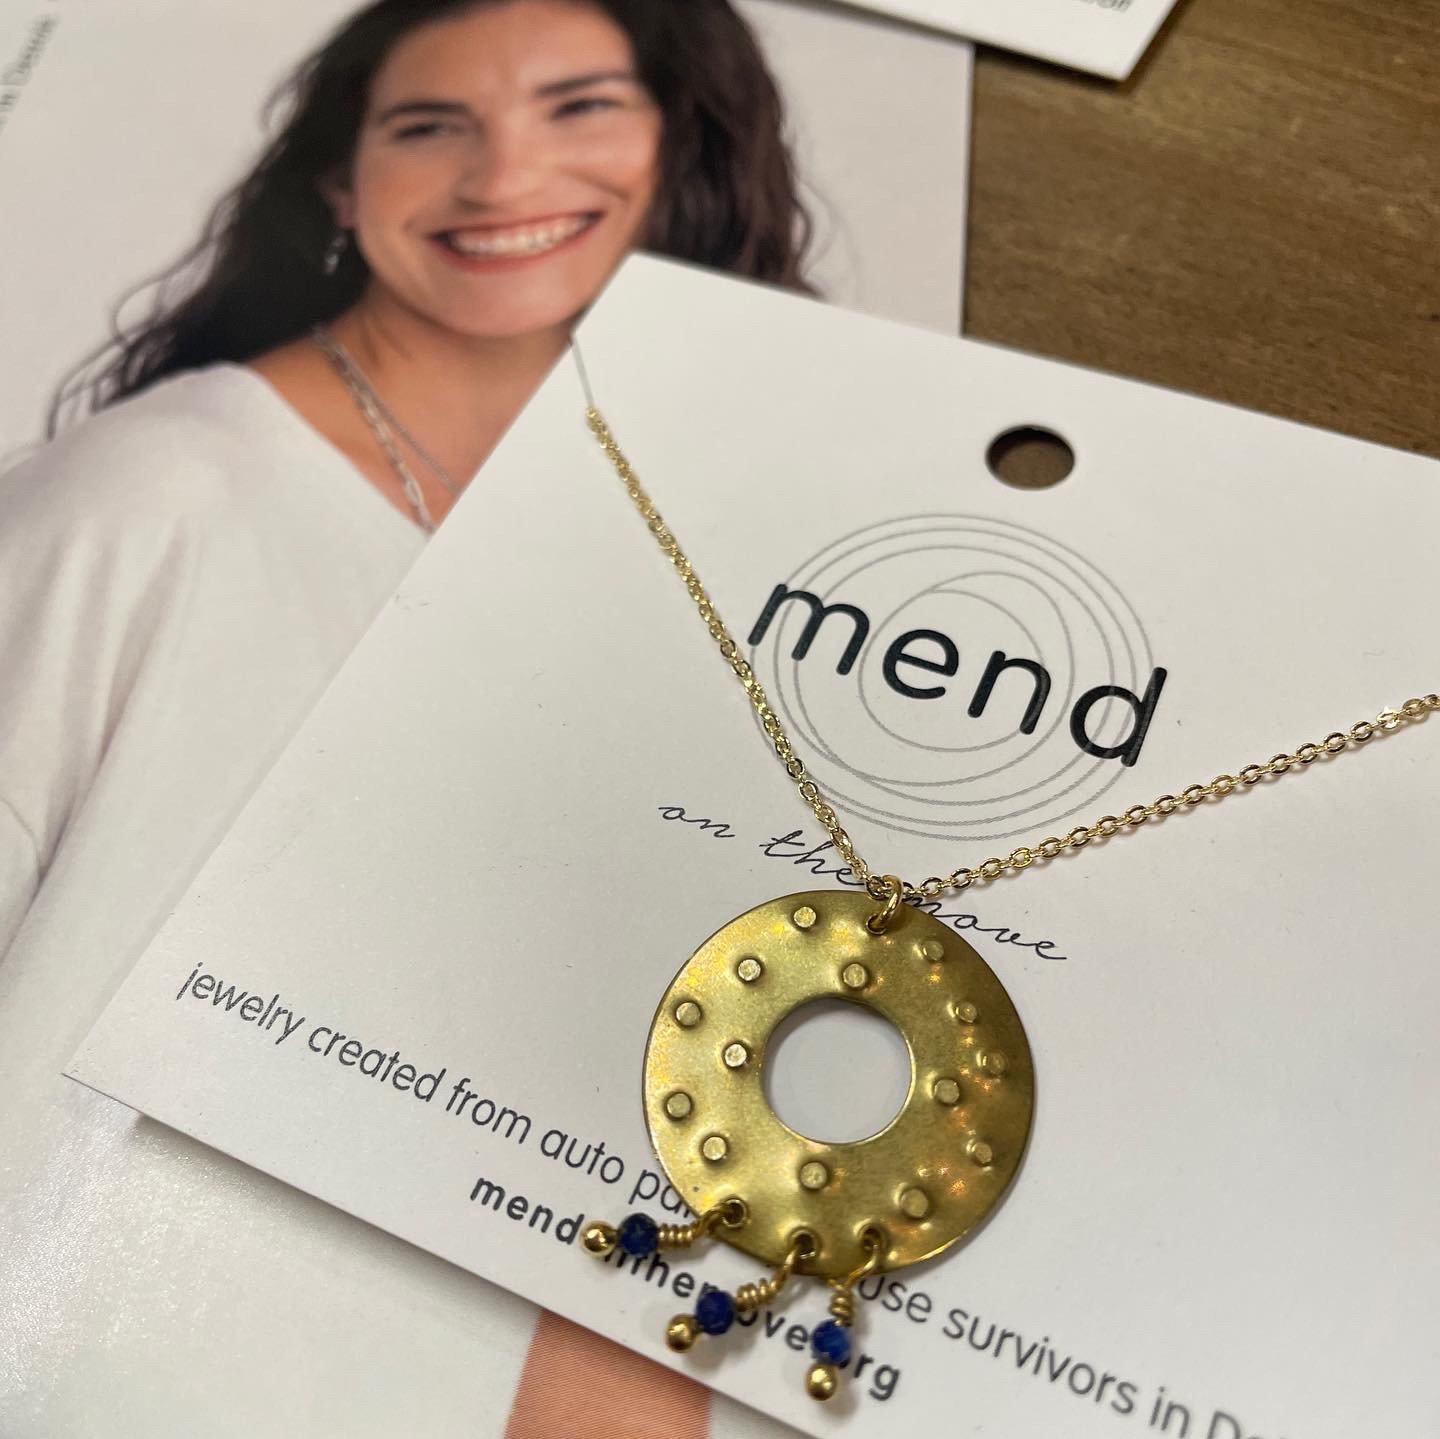 Mend Truth and Wisdom Collection Necklace $33.95 - brass washers and a pop of lapis stone (the universal symbol of truth and wisdom)